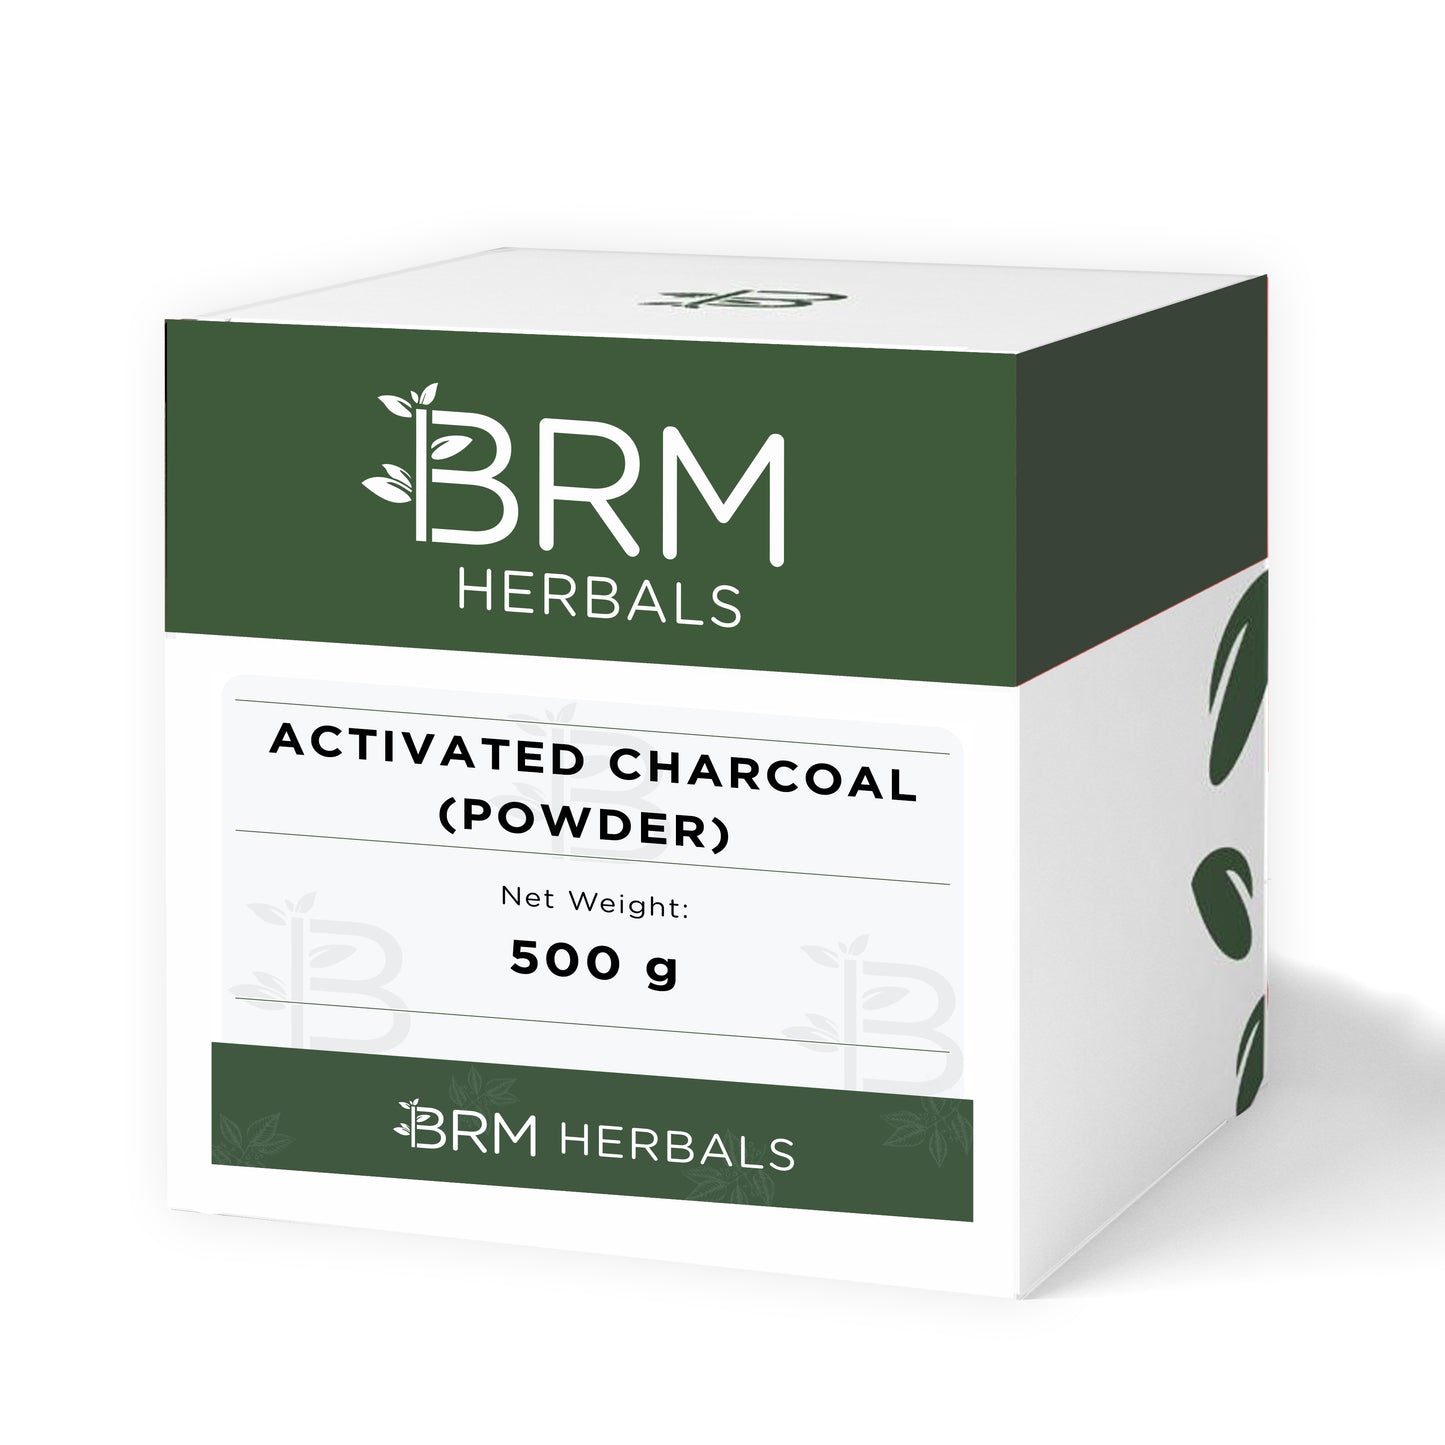 Activated Charcoal (Powder) - 500g